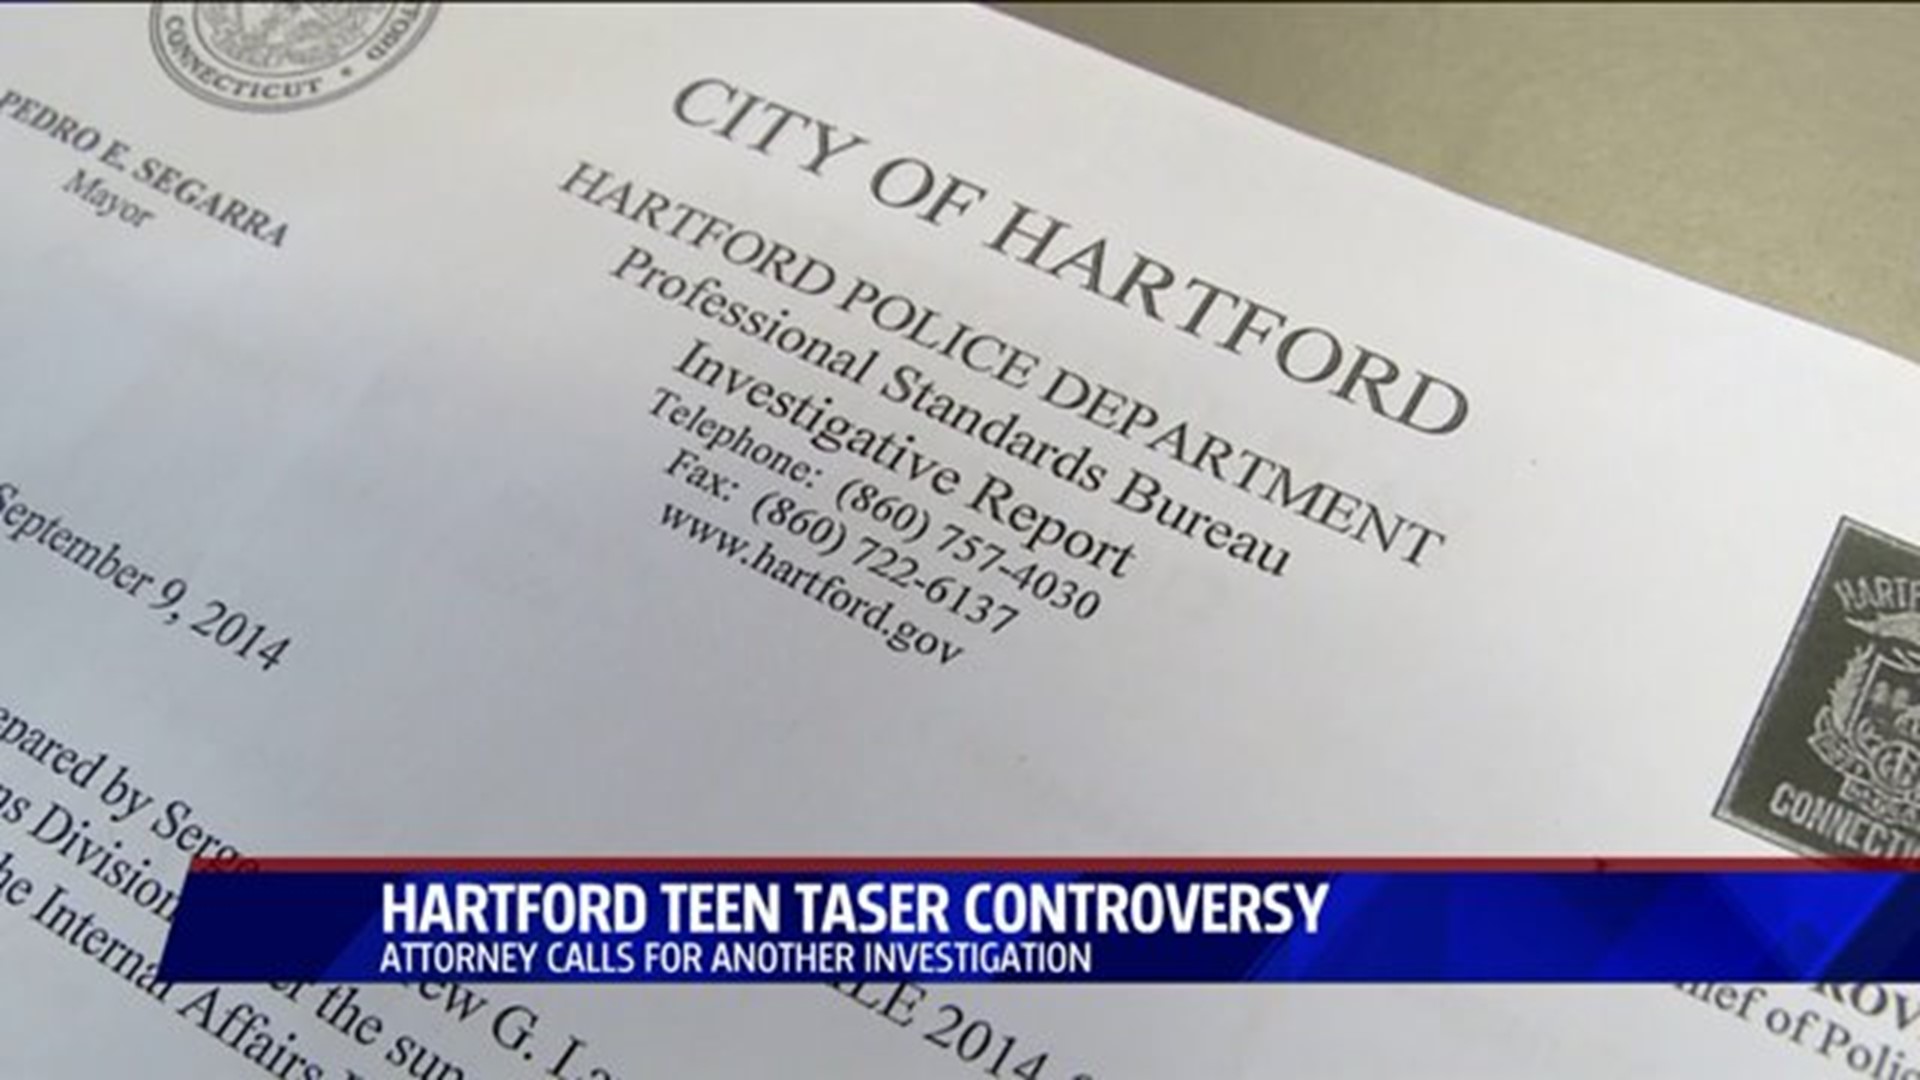 Calls For Second Investigation Into Officer Who Shot Hartford Teen With Taser